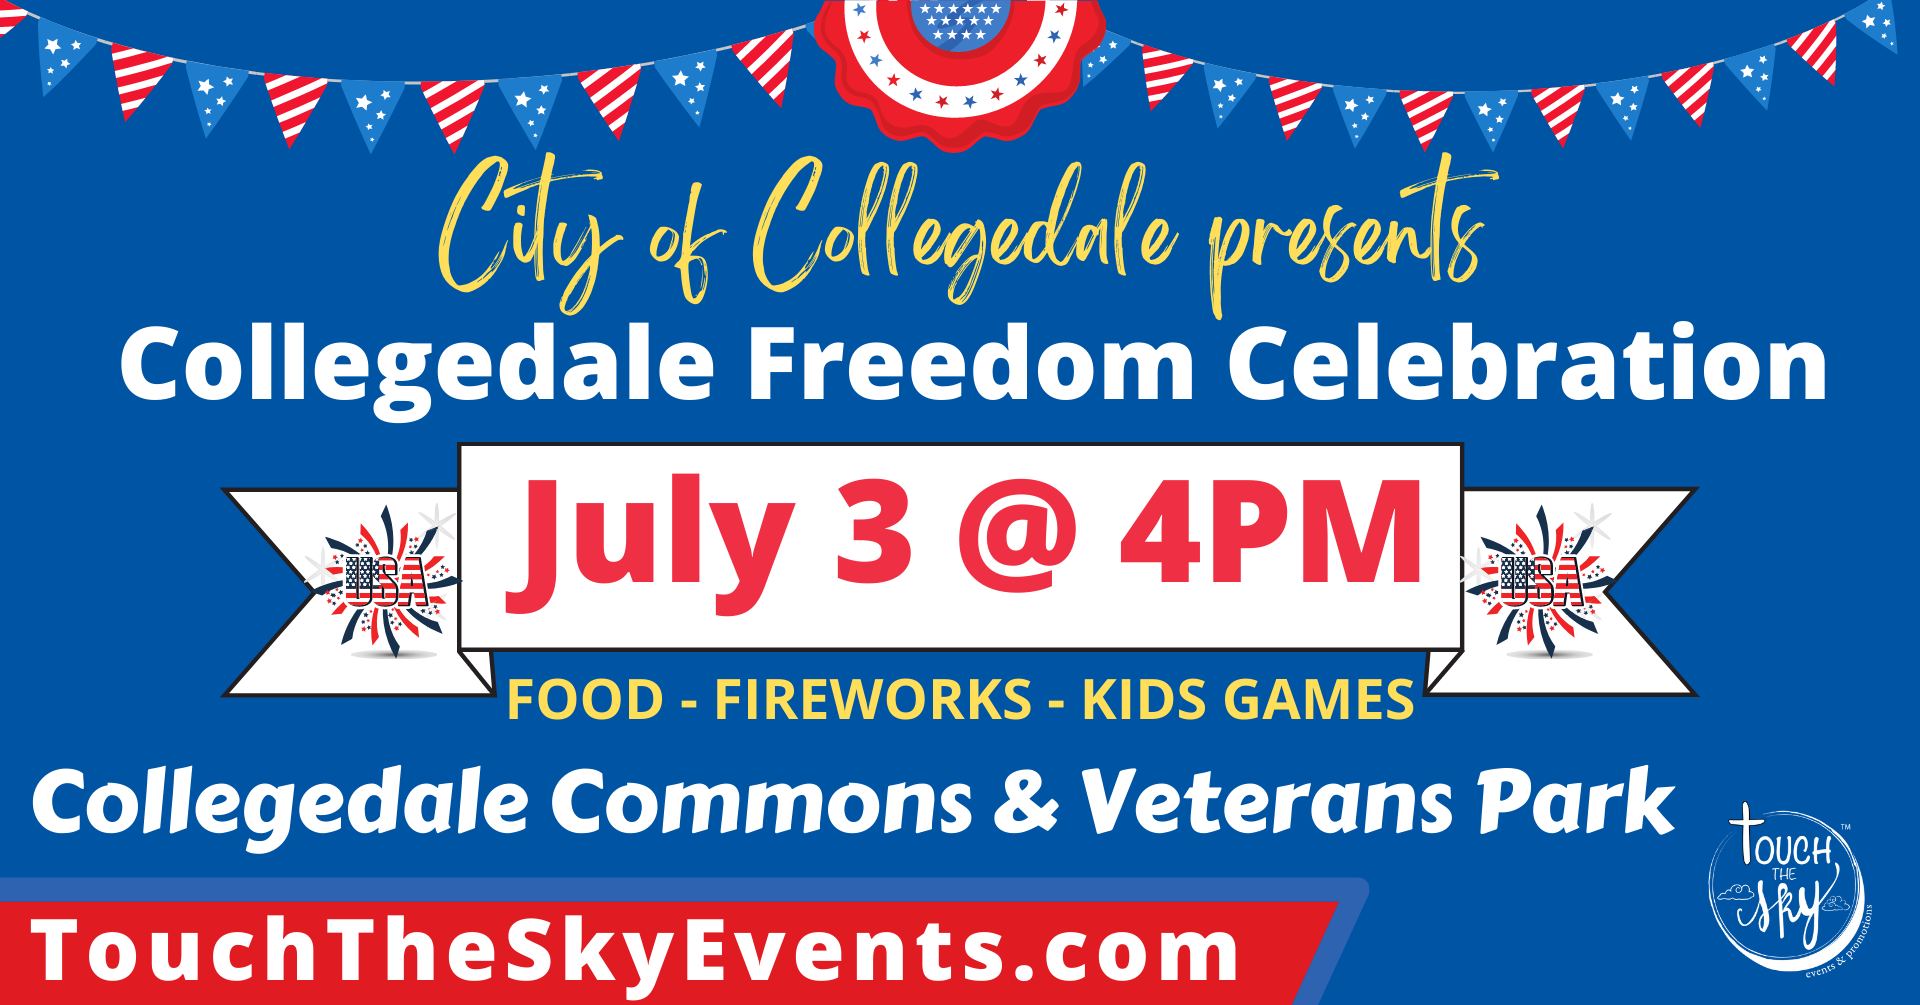 Collegedale Freedom Celebration Mix 104.1 FM WCLE Cleveland